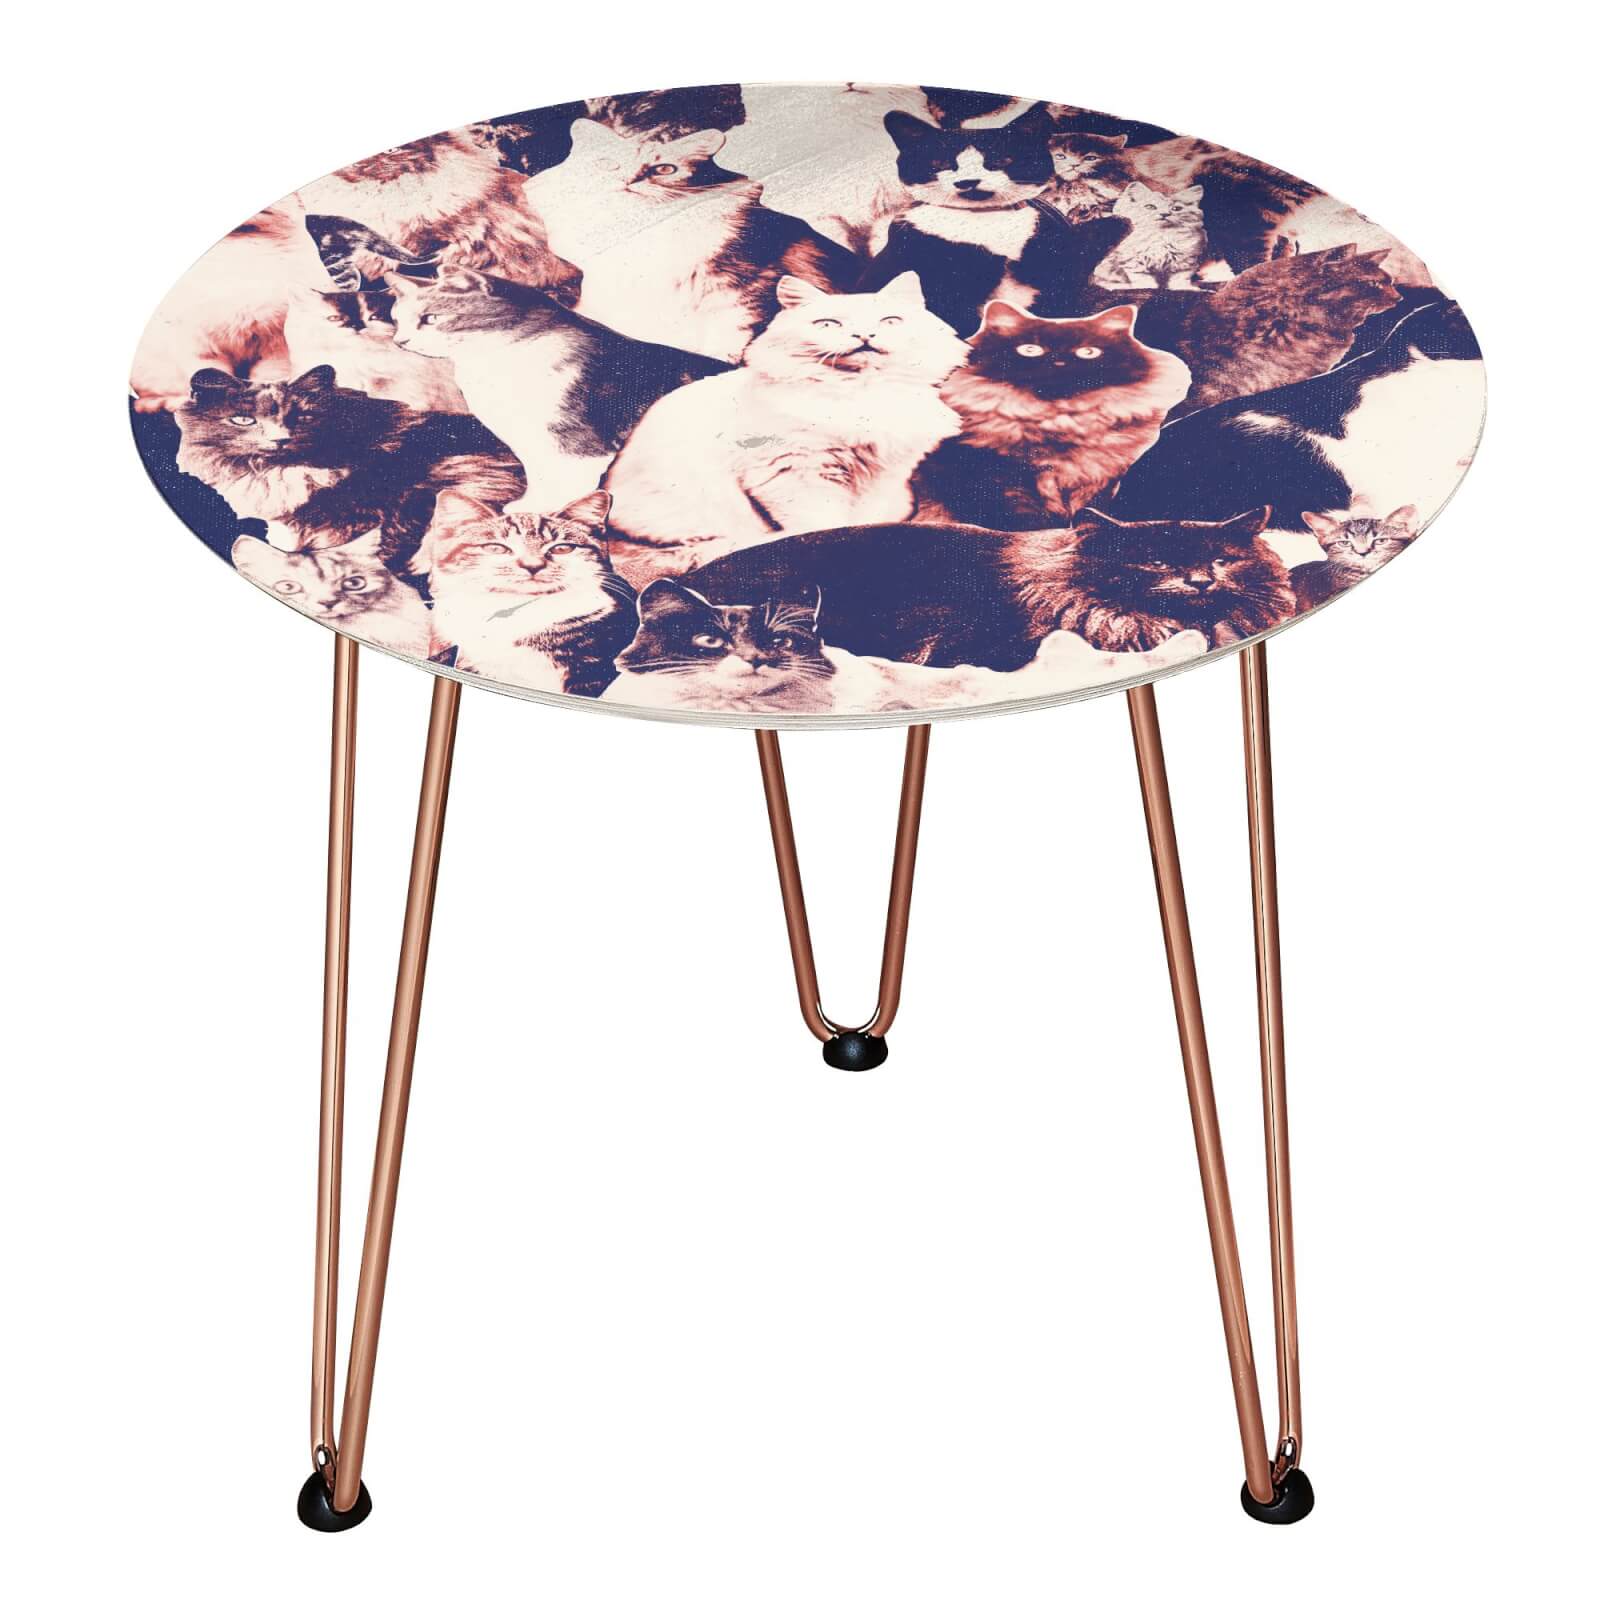 All The Cats Wooden Side Table - Rose gold